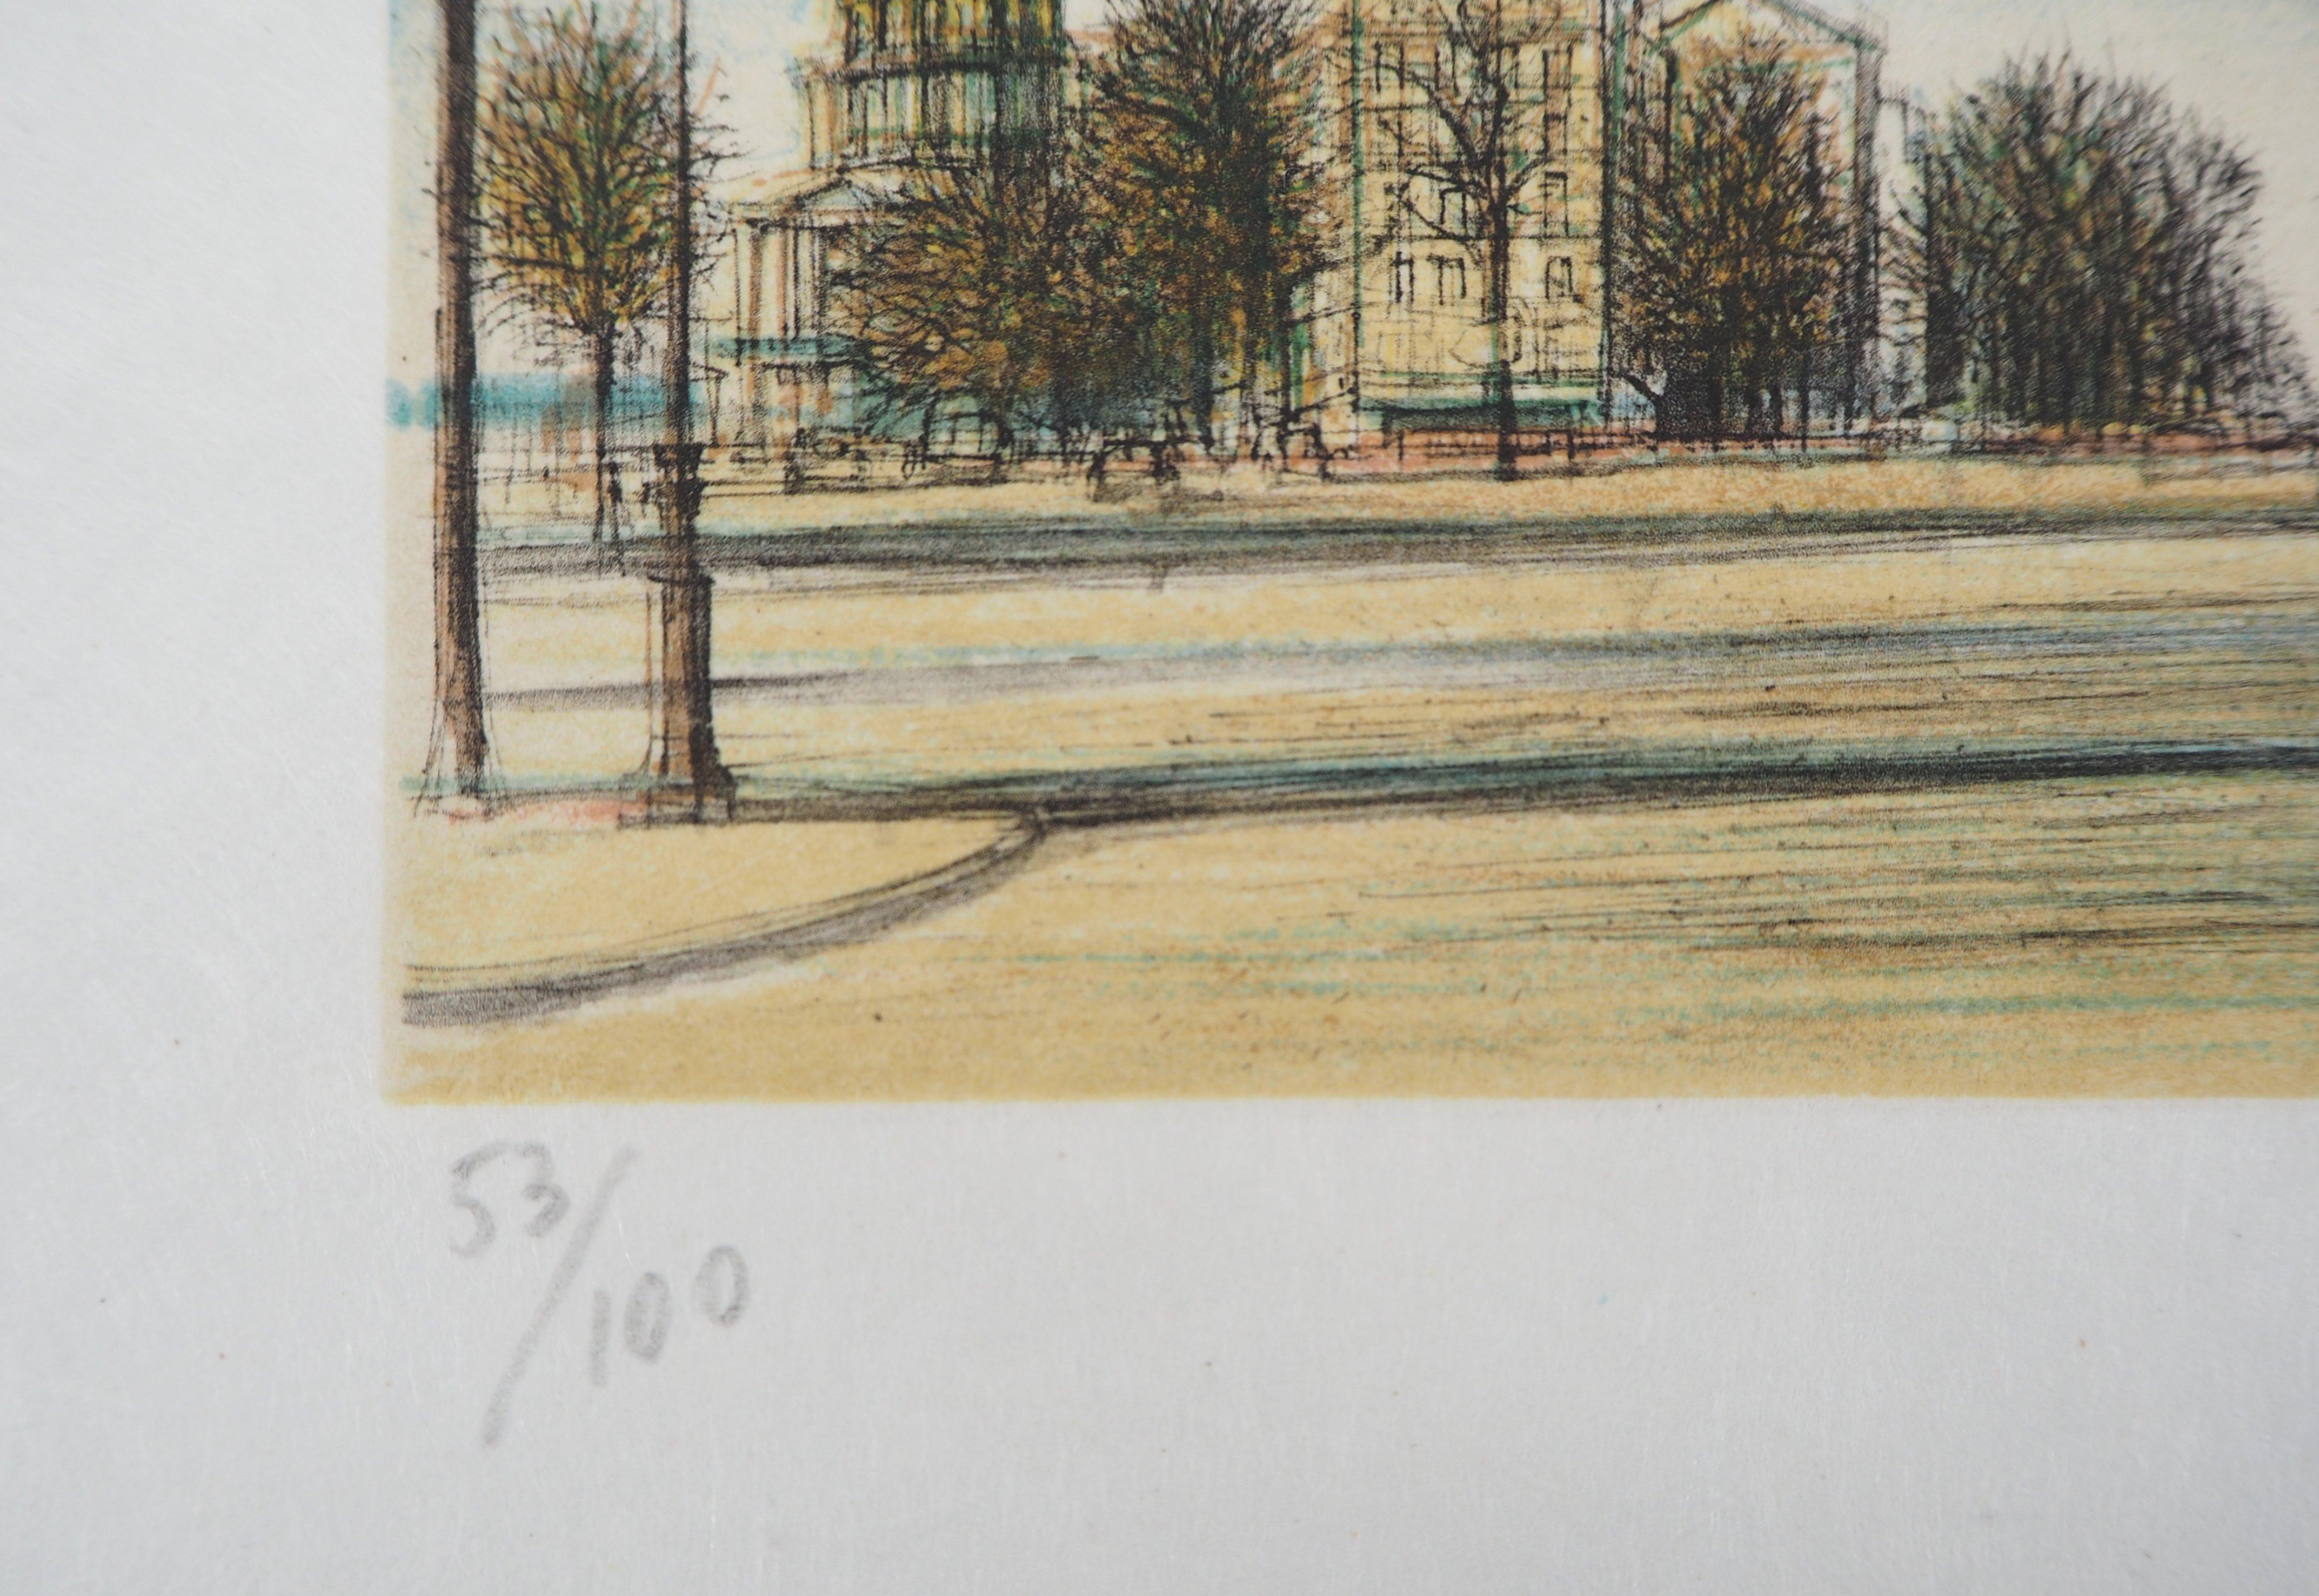 Jean CARZOU
Paris : Boulevard des Invalides, 1958

Original lithograph in color
Handsigned in pencil
Dated 1958 in pencil
Numbered / 100 ex
On Japan paper 29 x 40 cm (c. 11.4 x 15.7 inch)

Excellent condition